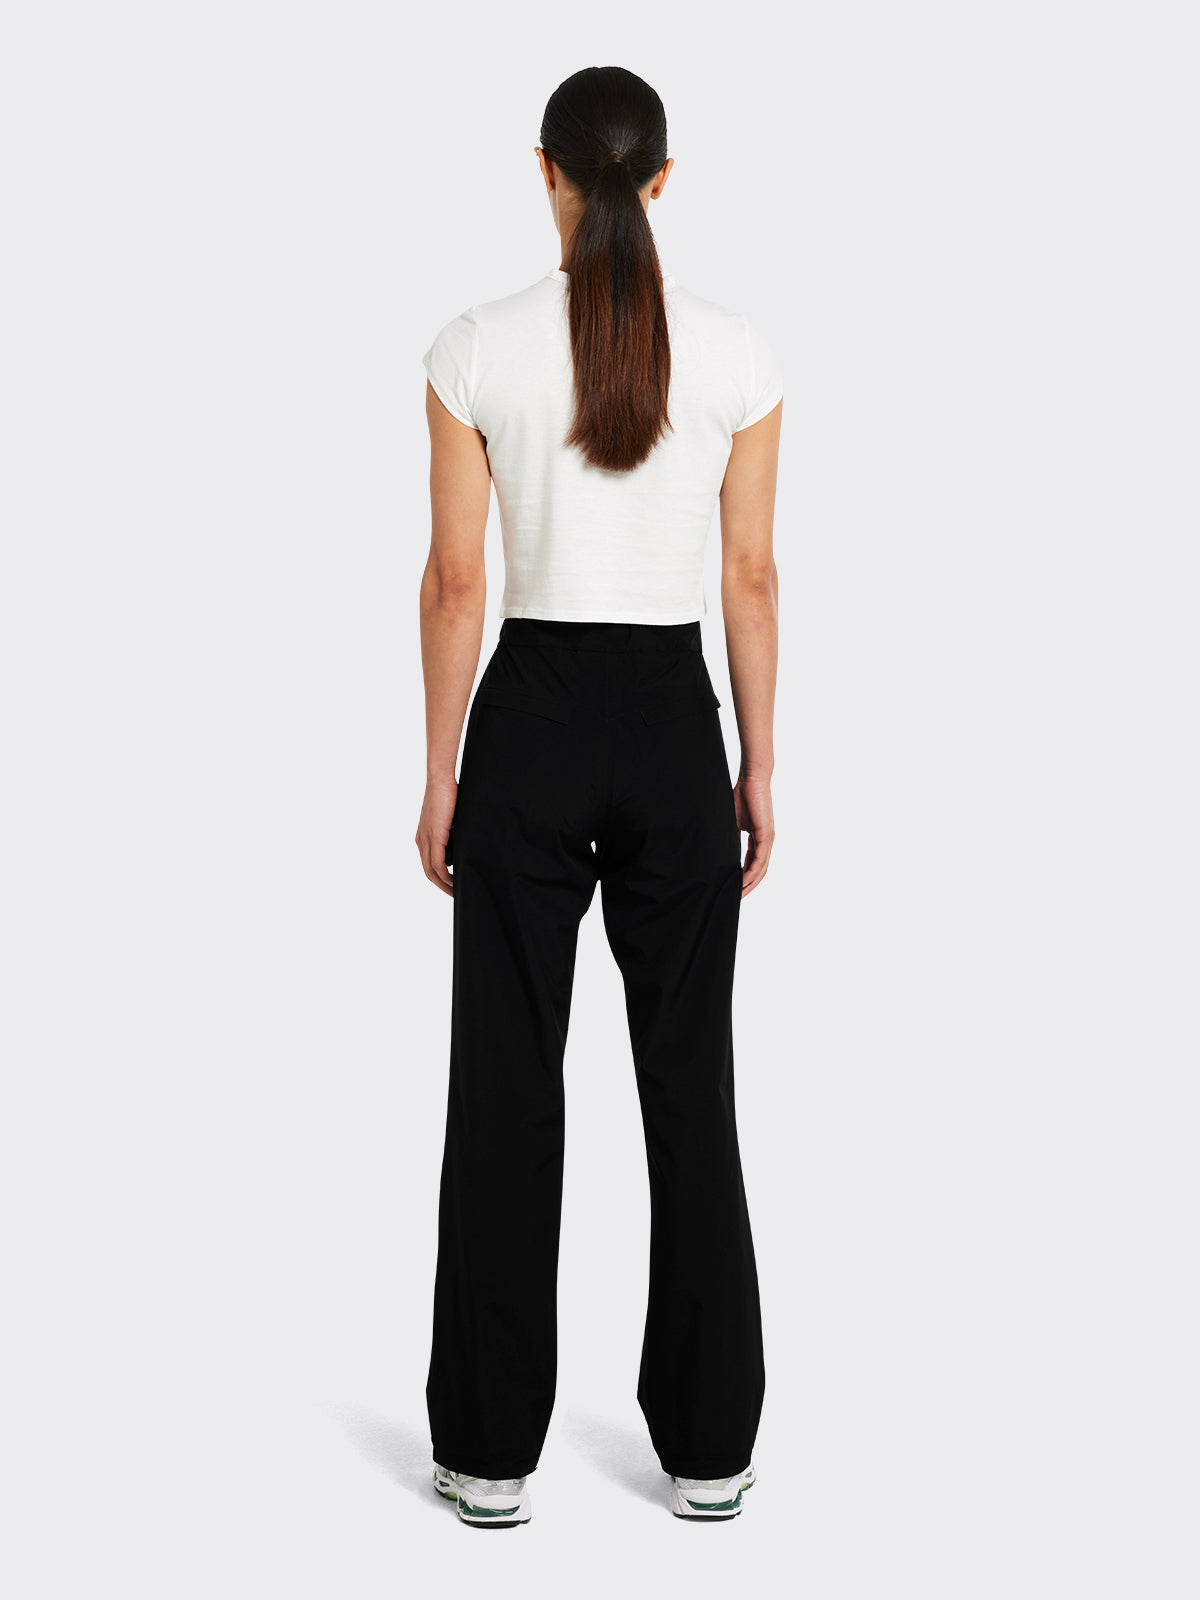 Woman wearing Nørve pant from Blæst in Black